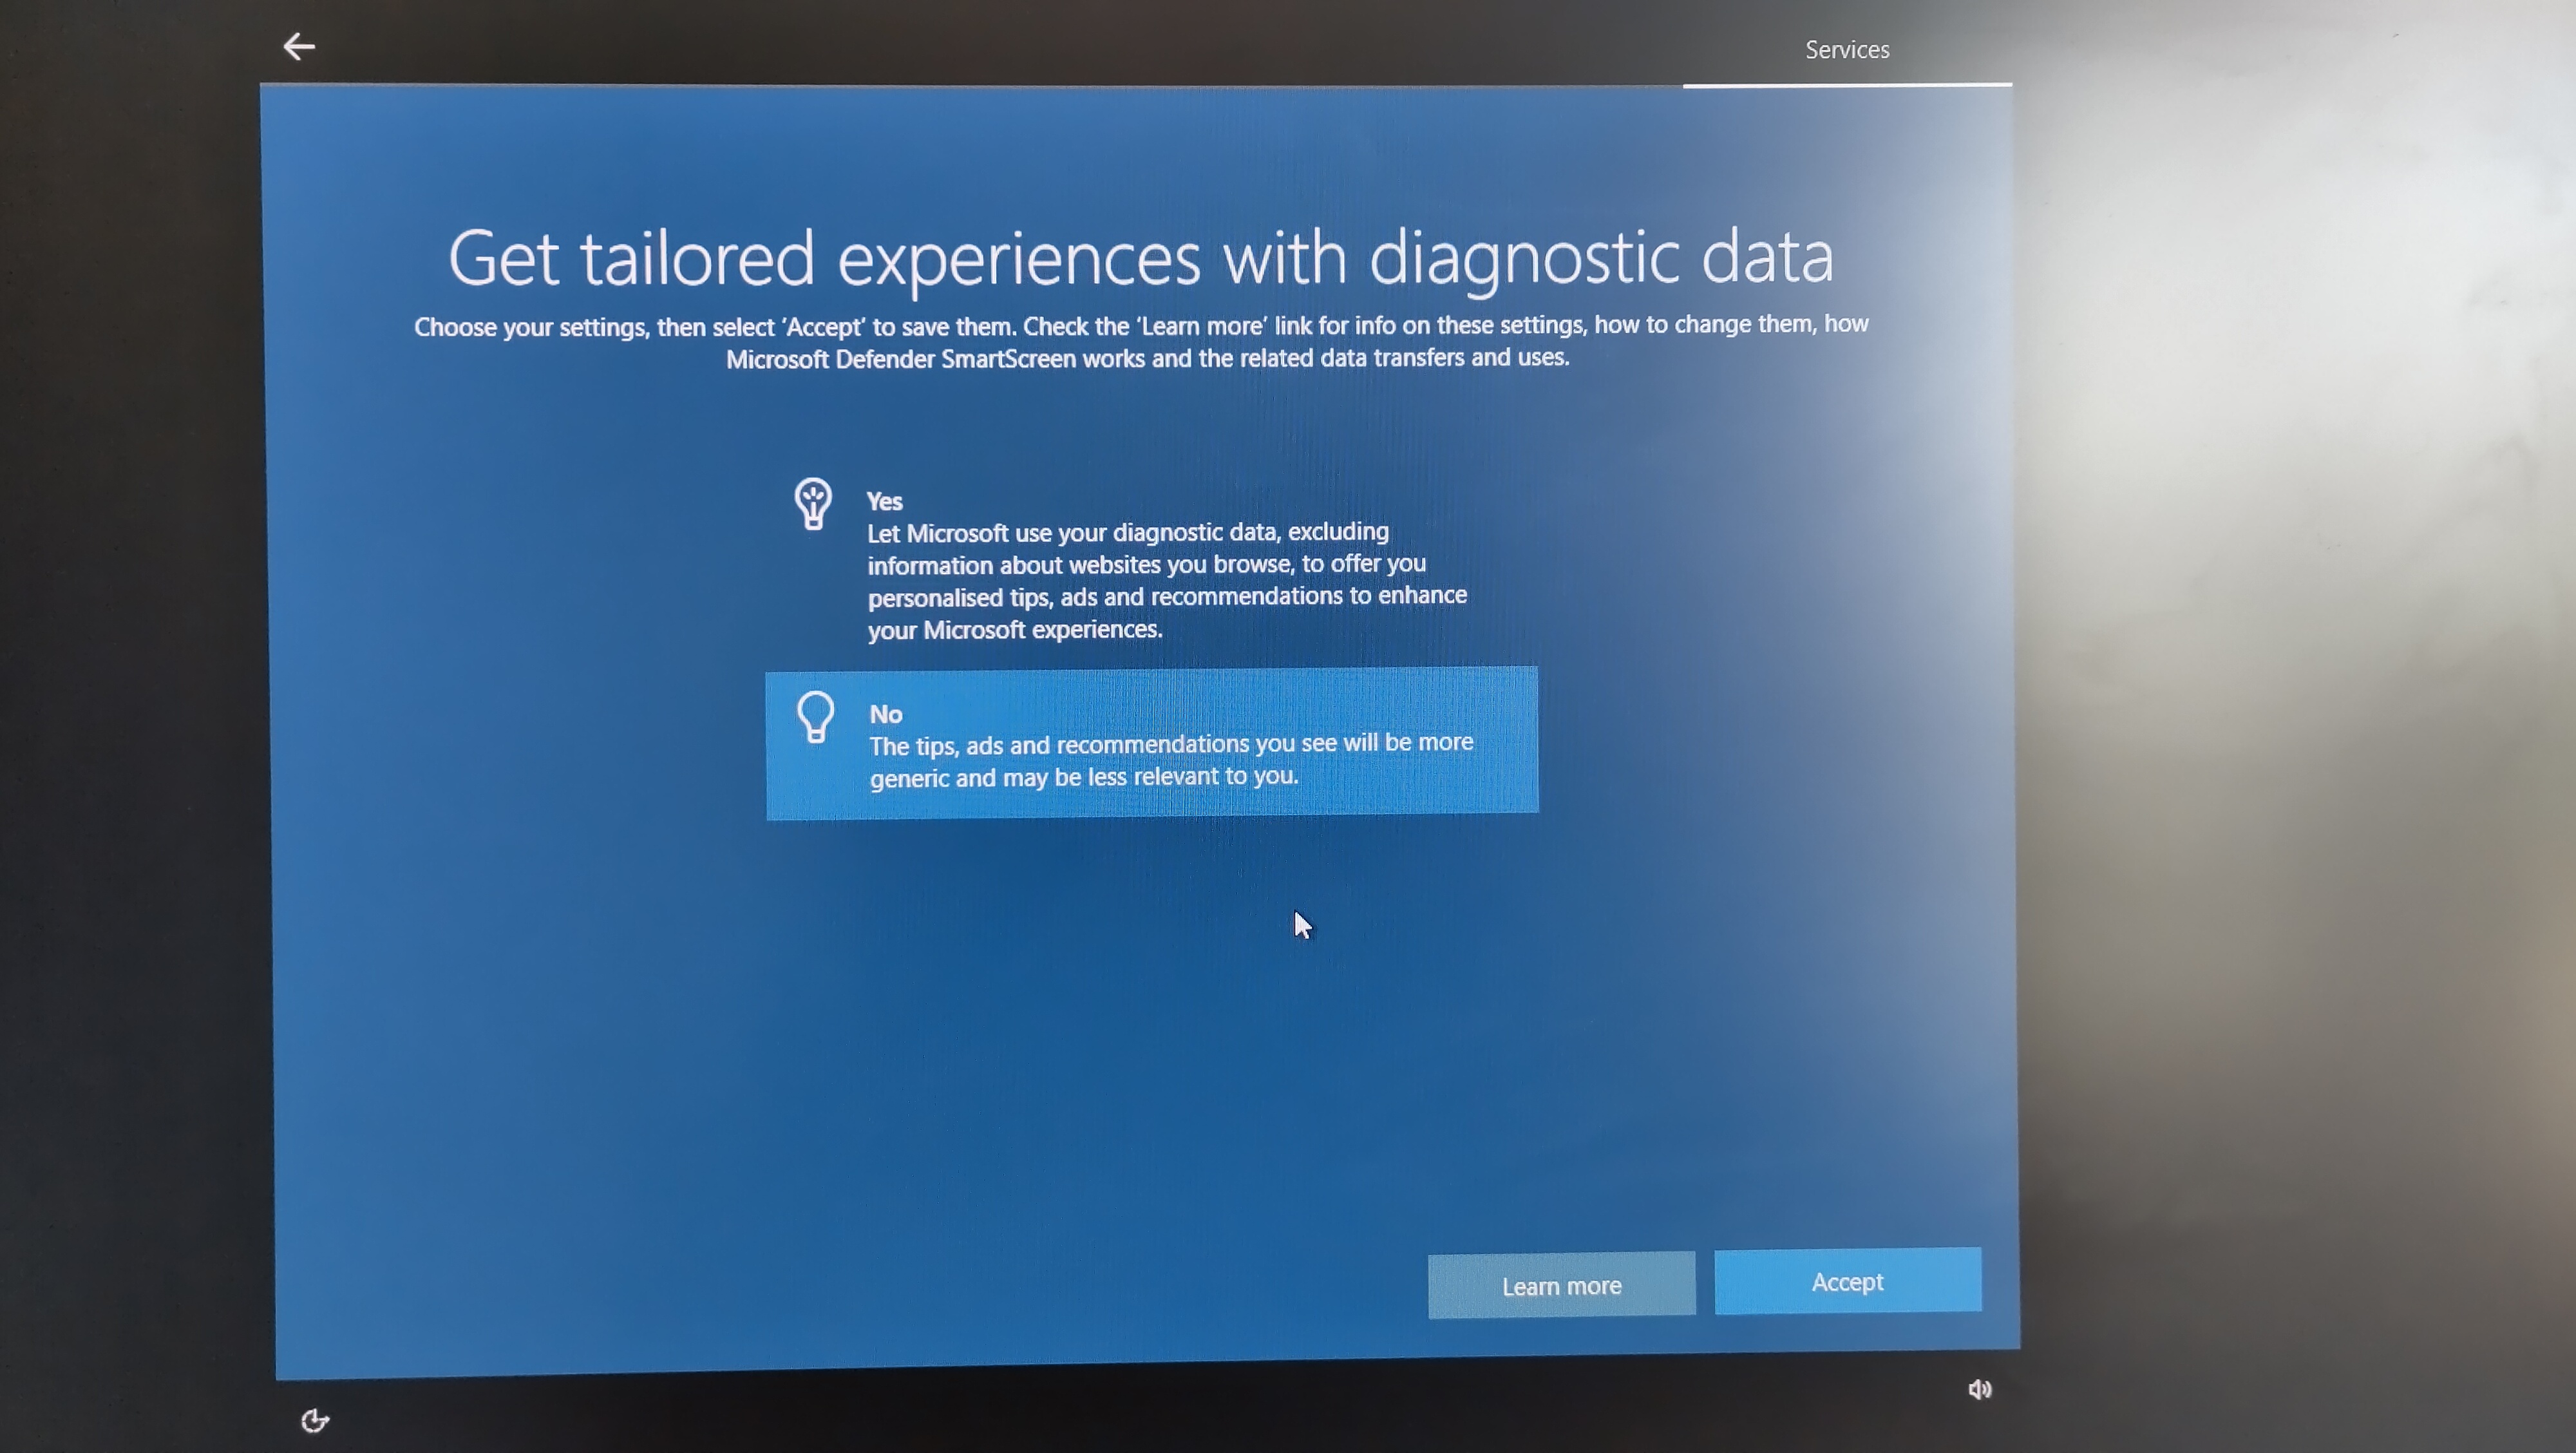 Get tailored experiences with diagnostic data